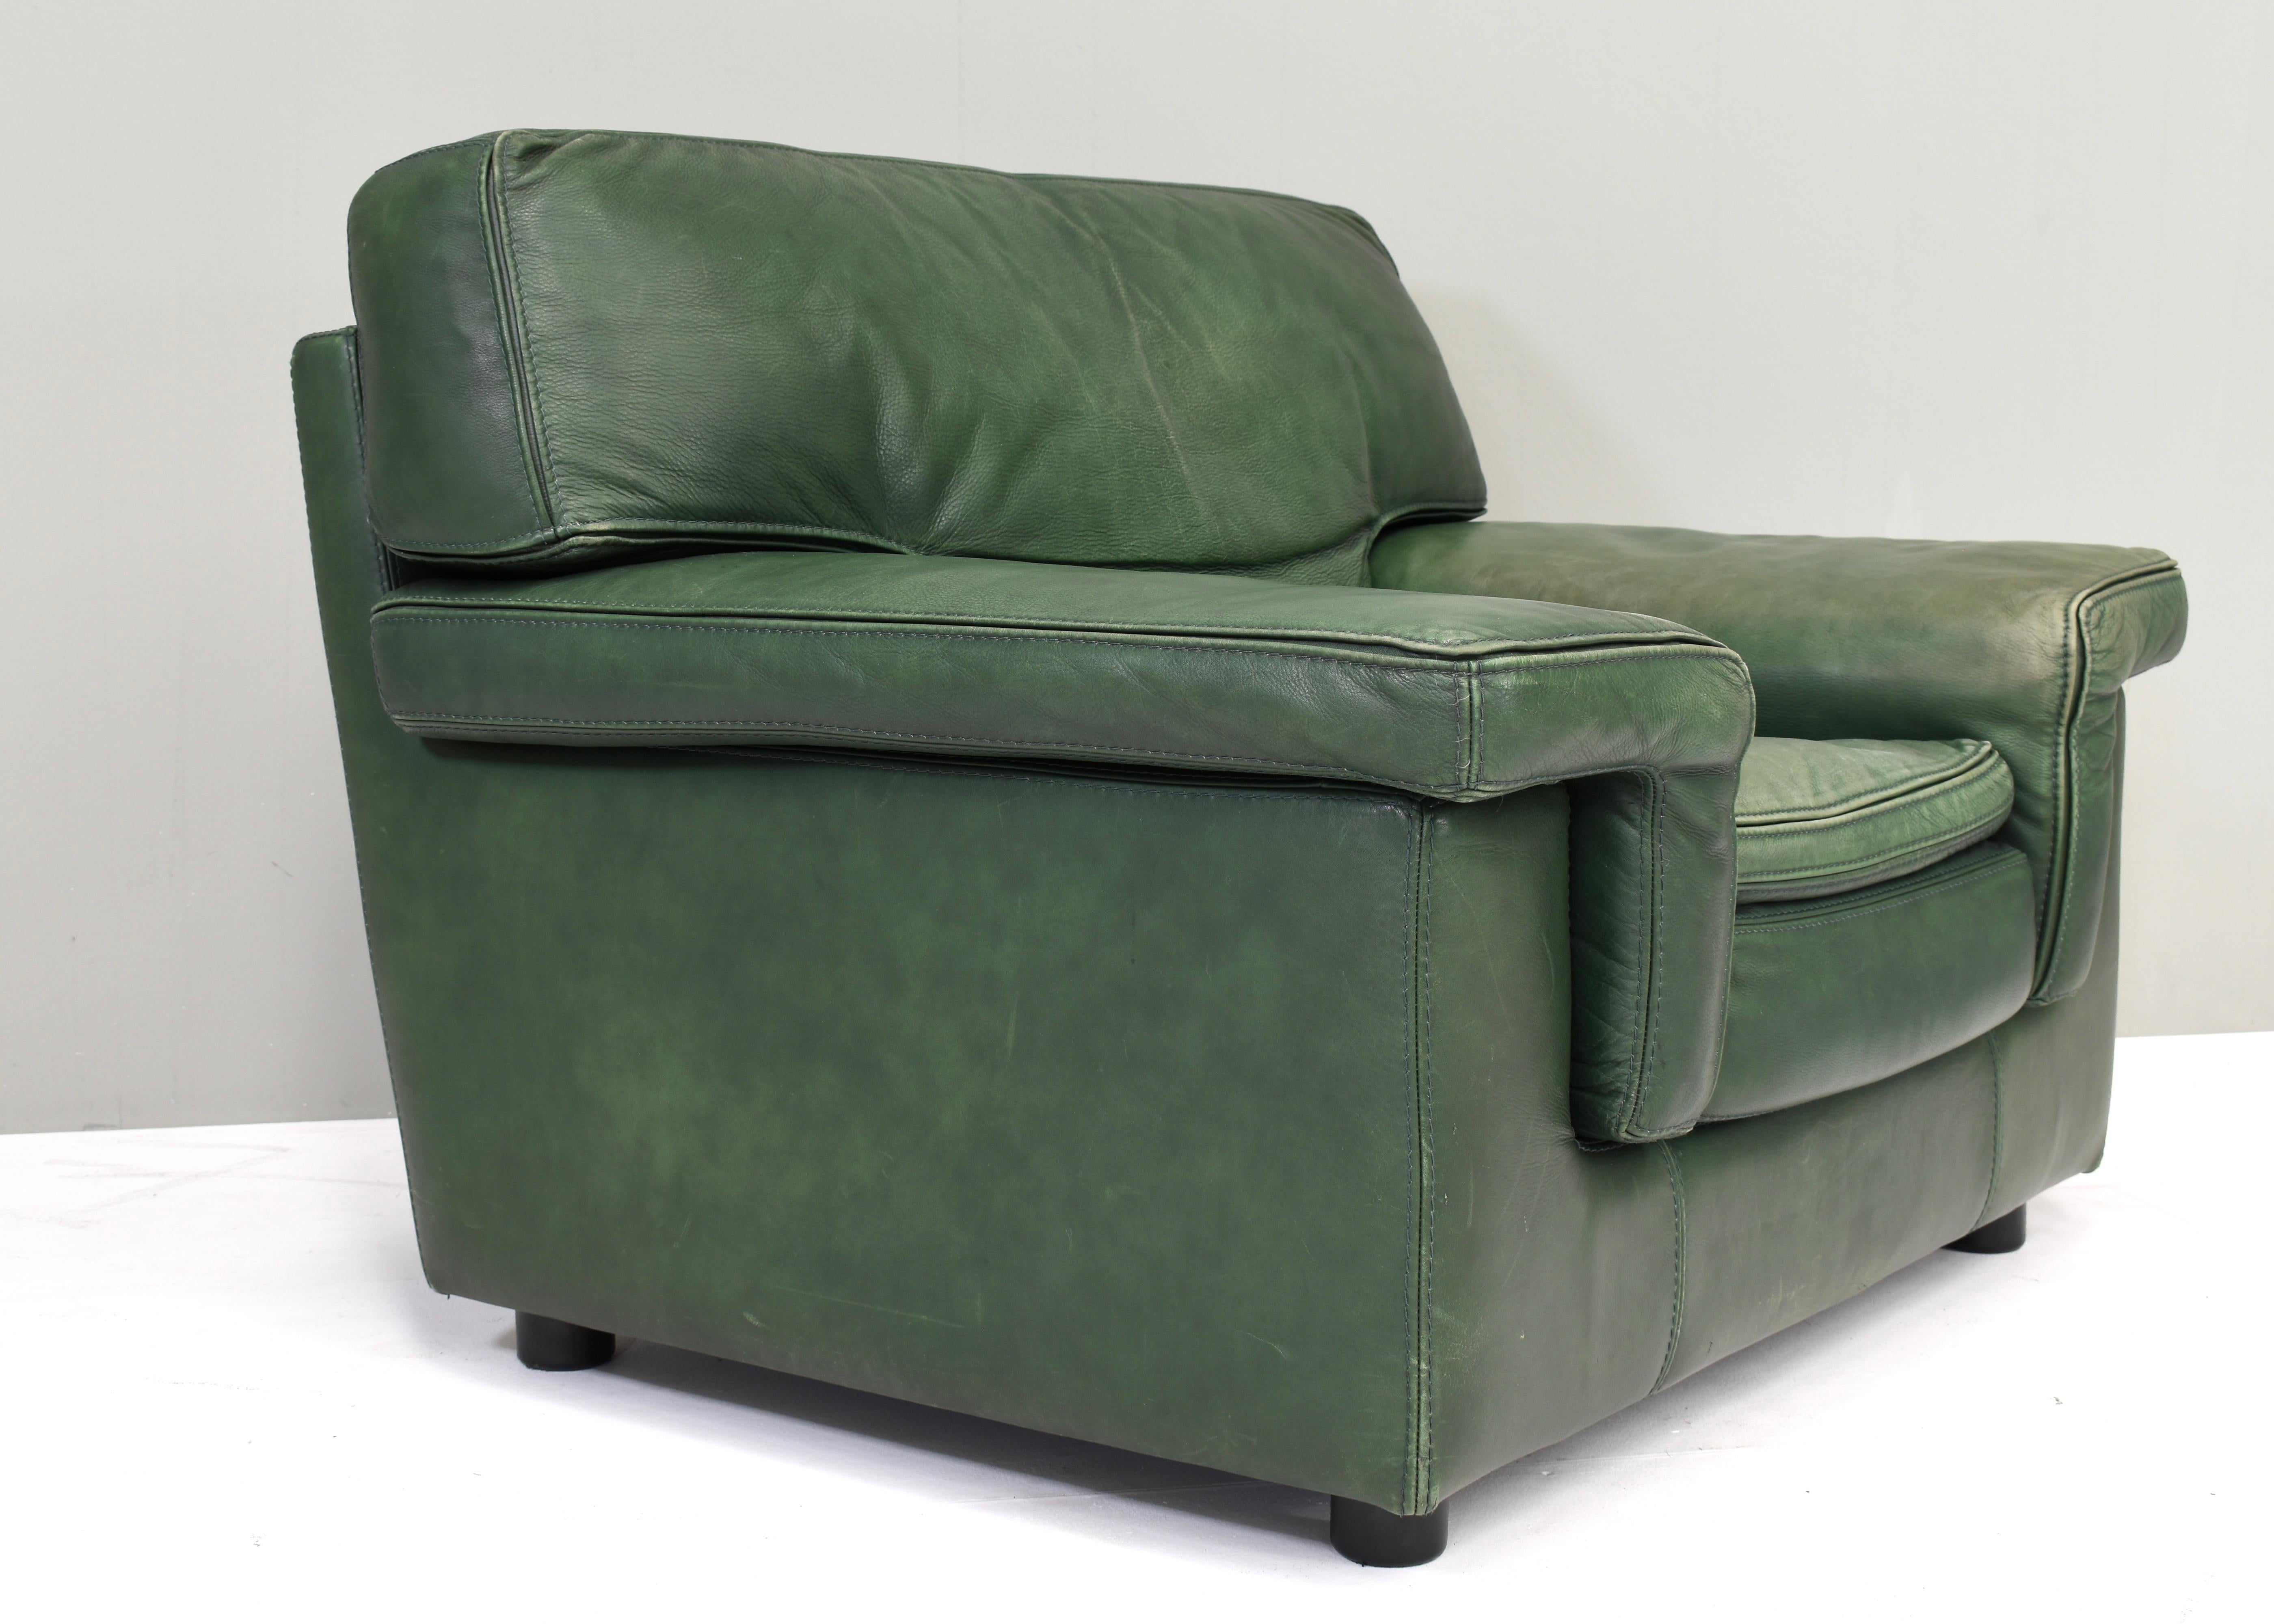 Late 20th Century Roche Bobois Lounge Armchair in Original Green Patinated Leather – circa 1970 For Sale